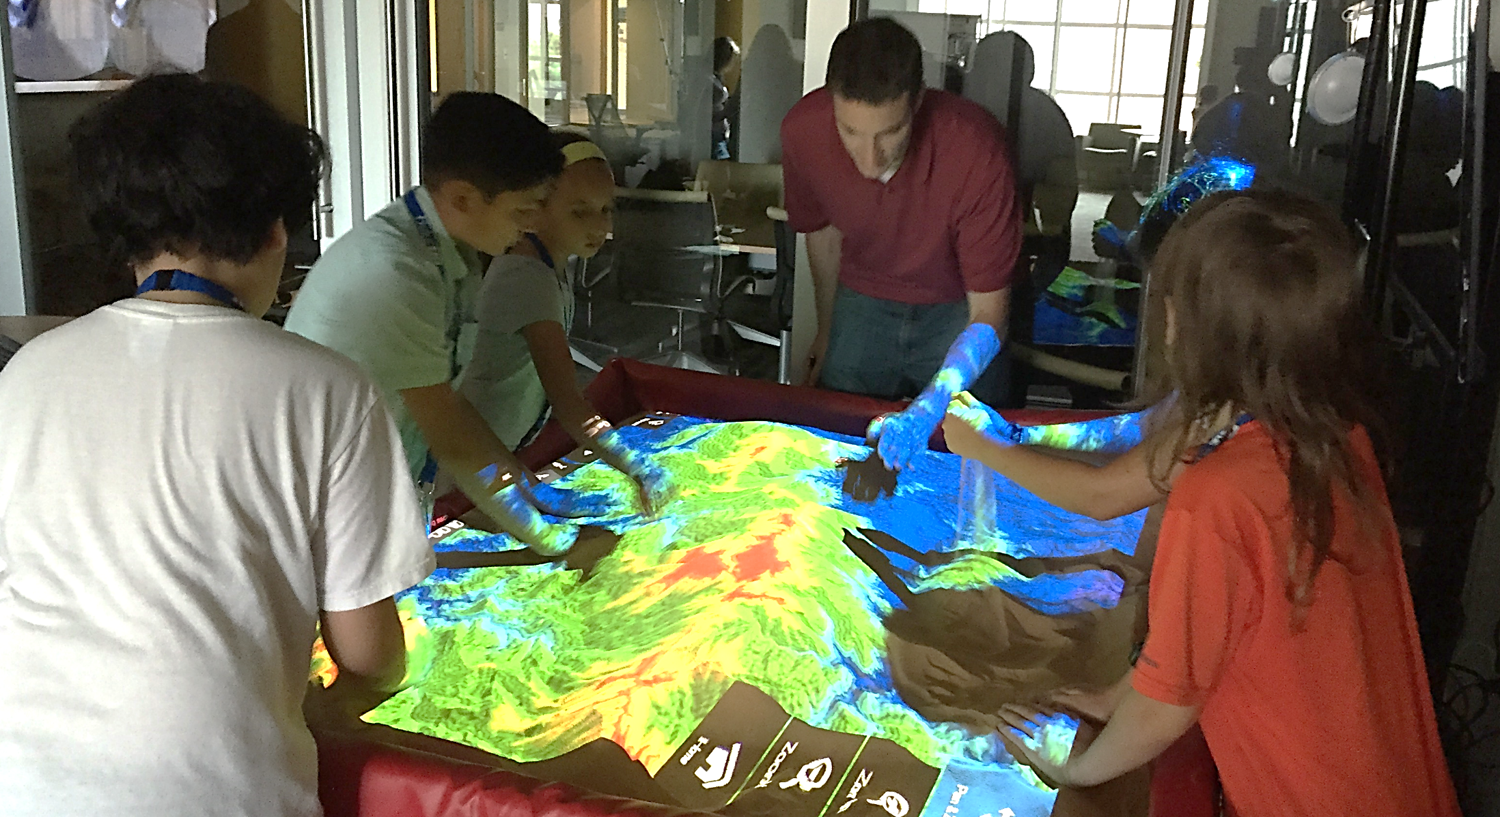 A photo of visiting students from a Duke Talent Identification Program (TIP) workshop at the North Carolina State University Center for Geospatial Analytics